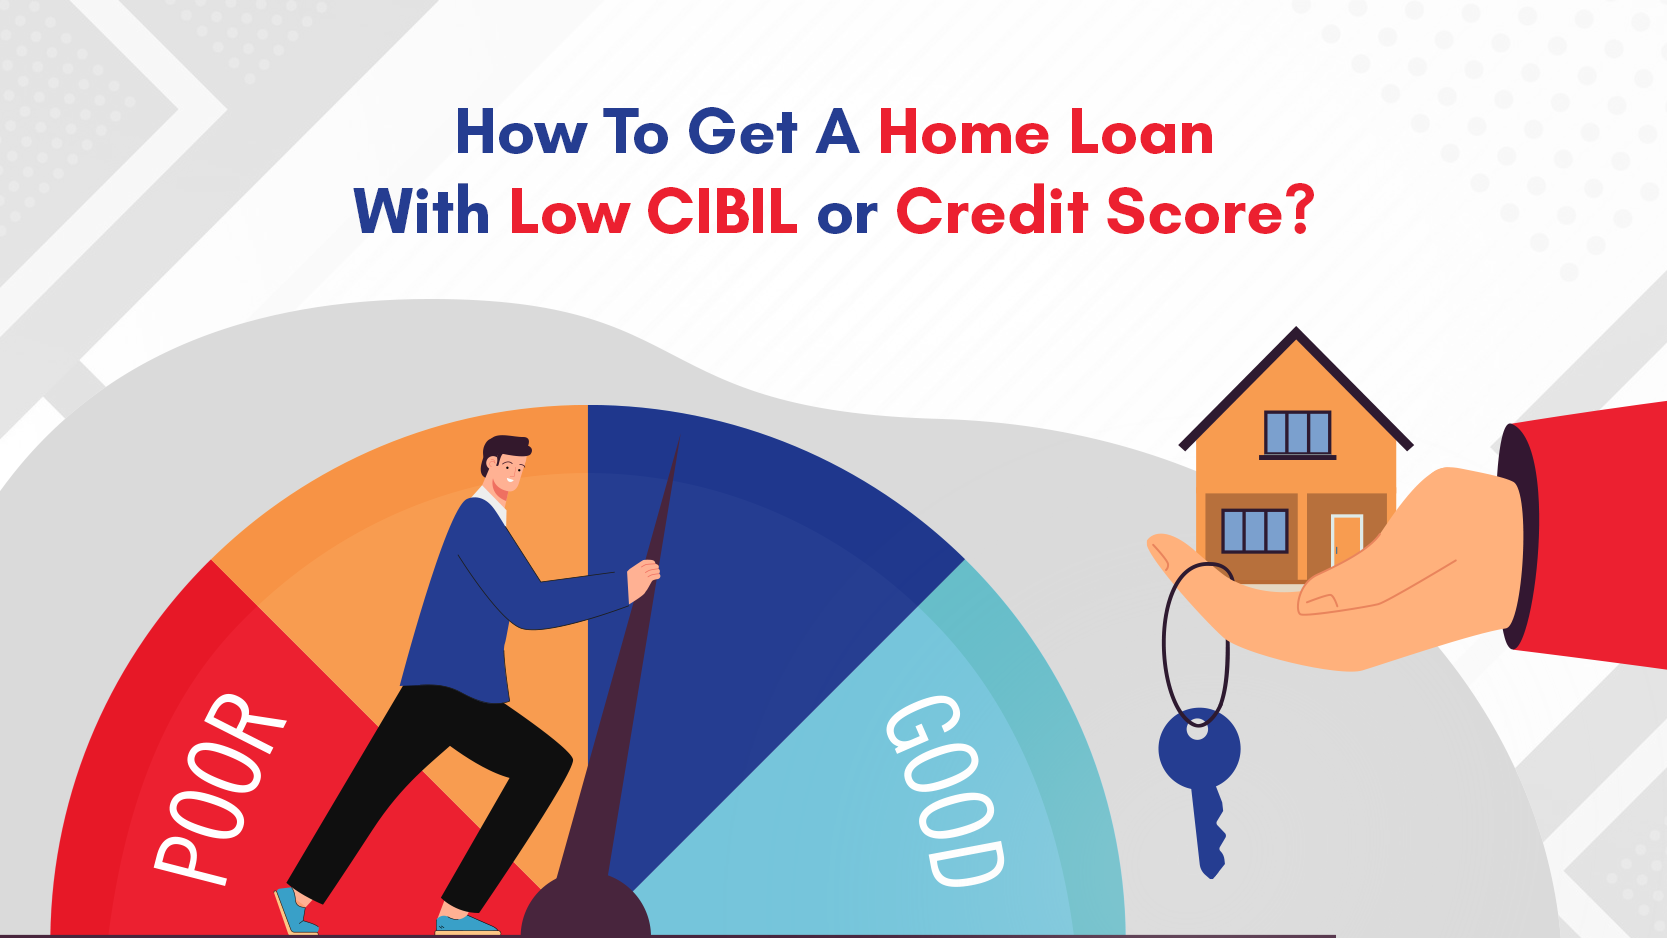 How To Get A Home Loan
With Low CIBIL or Credit Score?

/a\